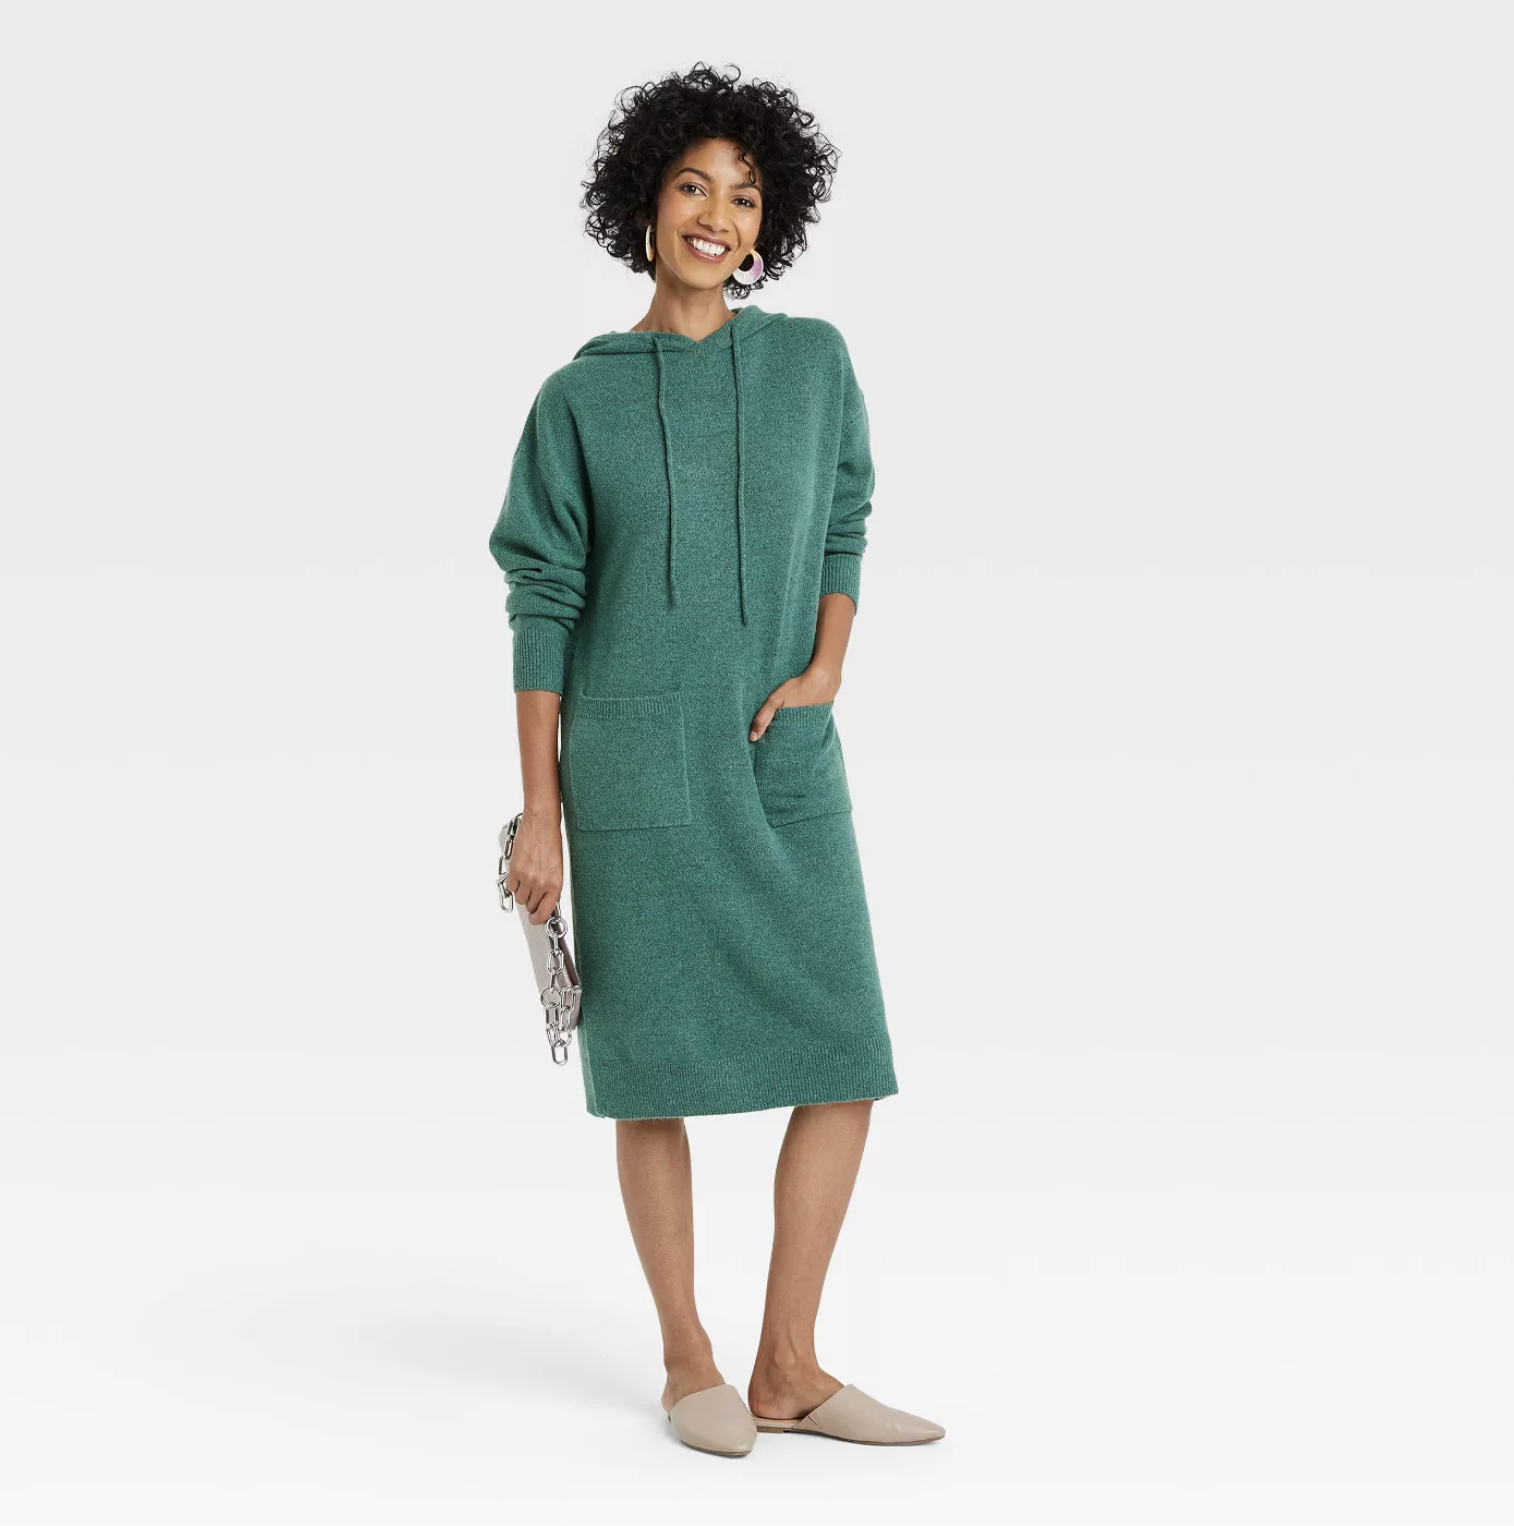 front view of model wearing the dress in green